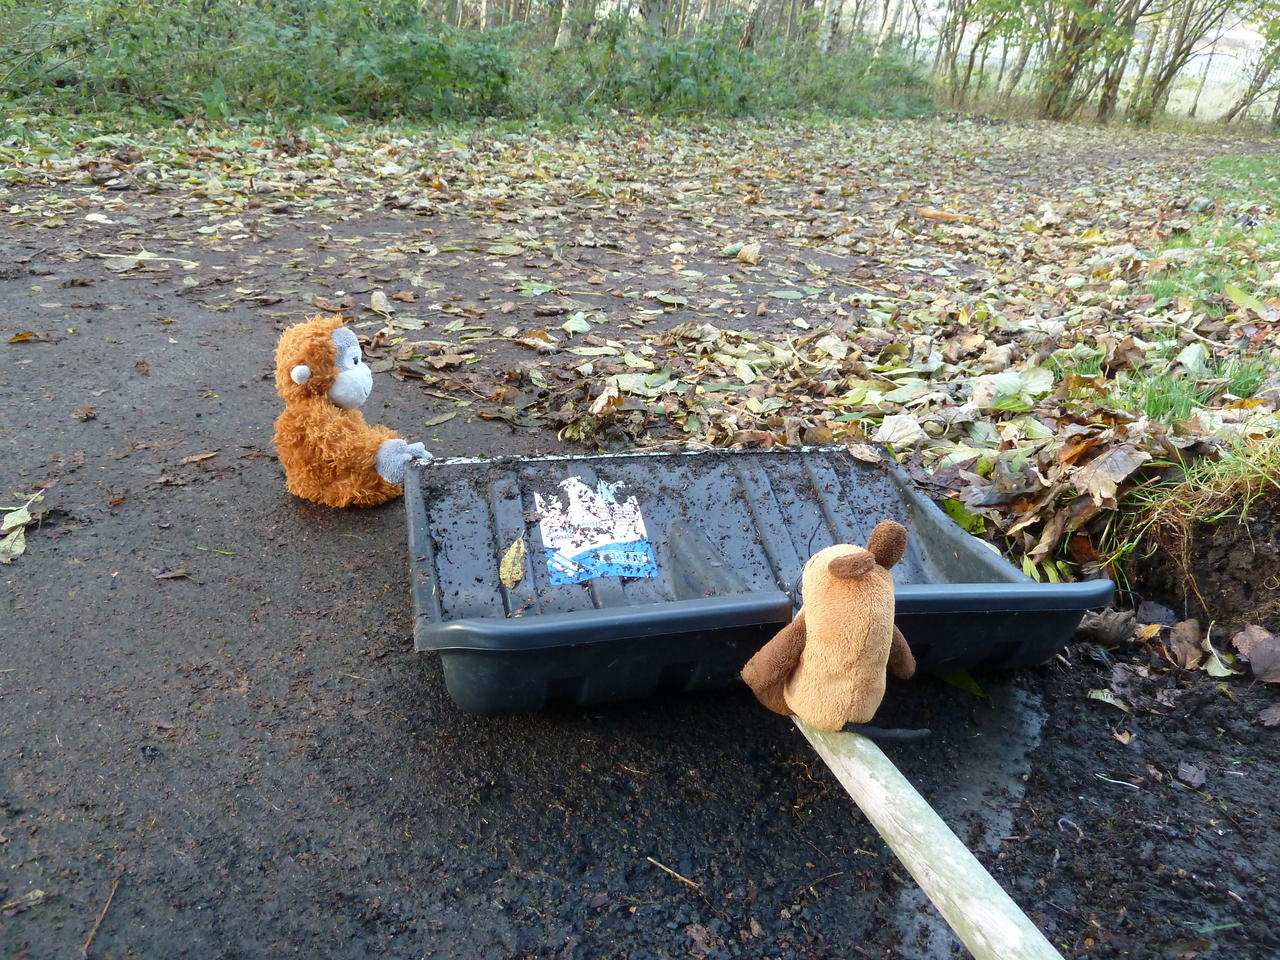 Pongo and Mouse sitting on the path, which is partly cleaned from leaves